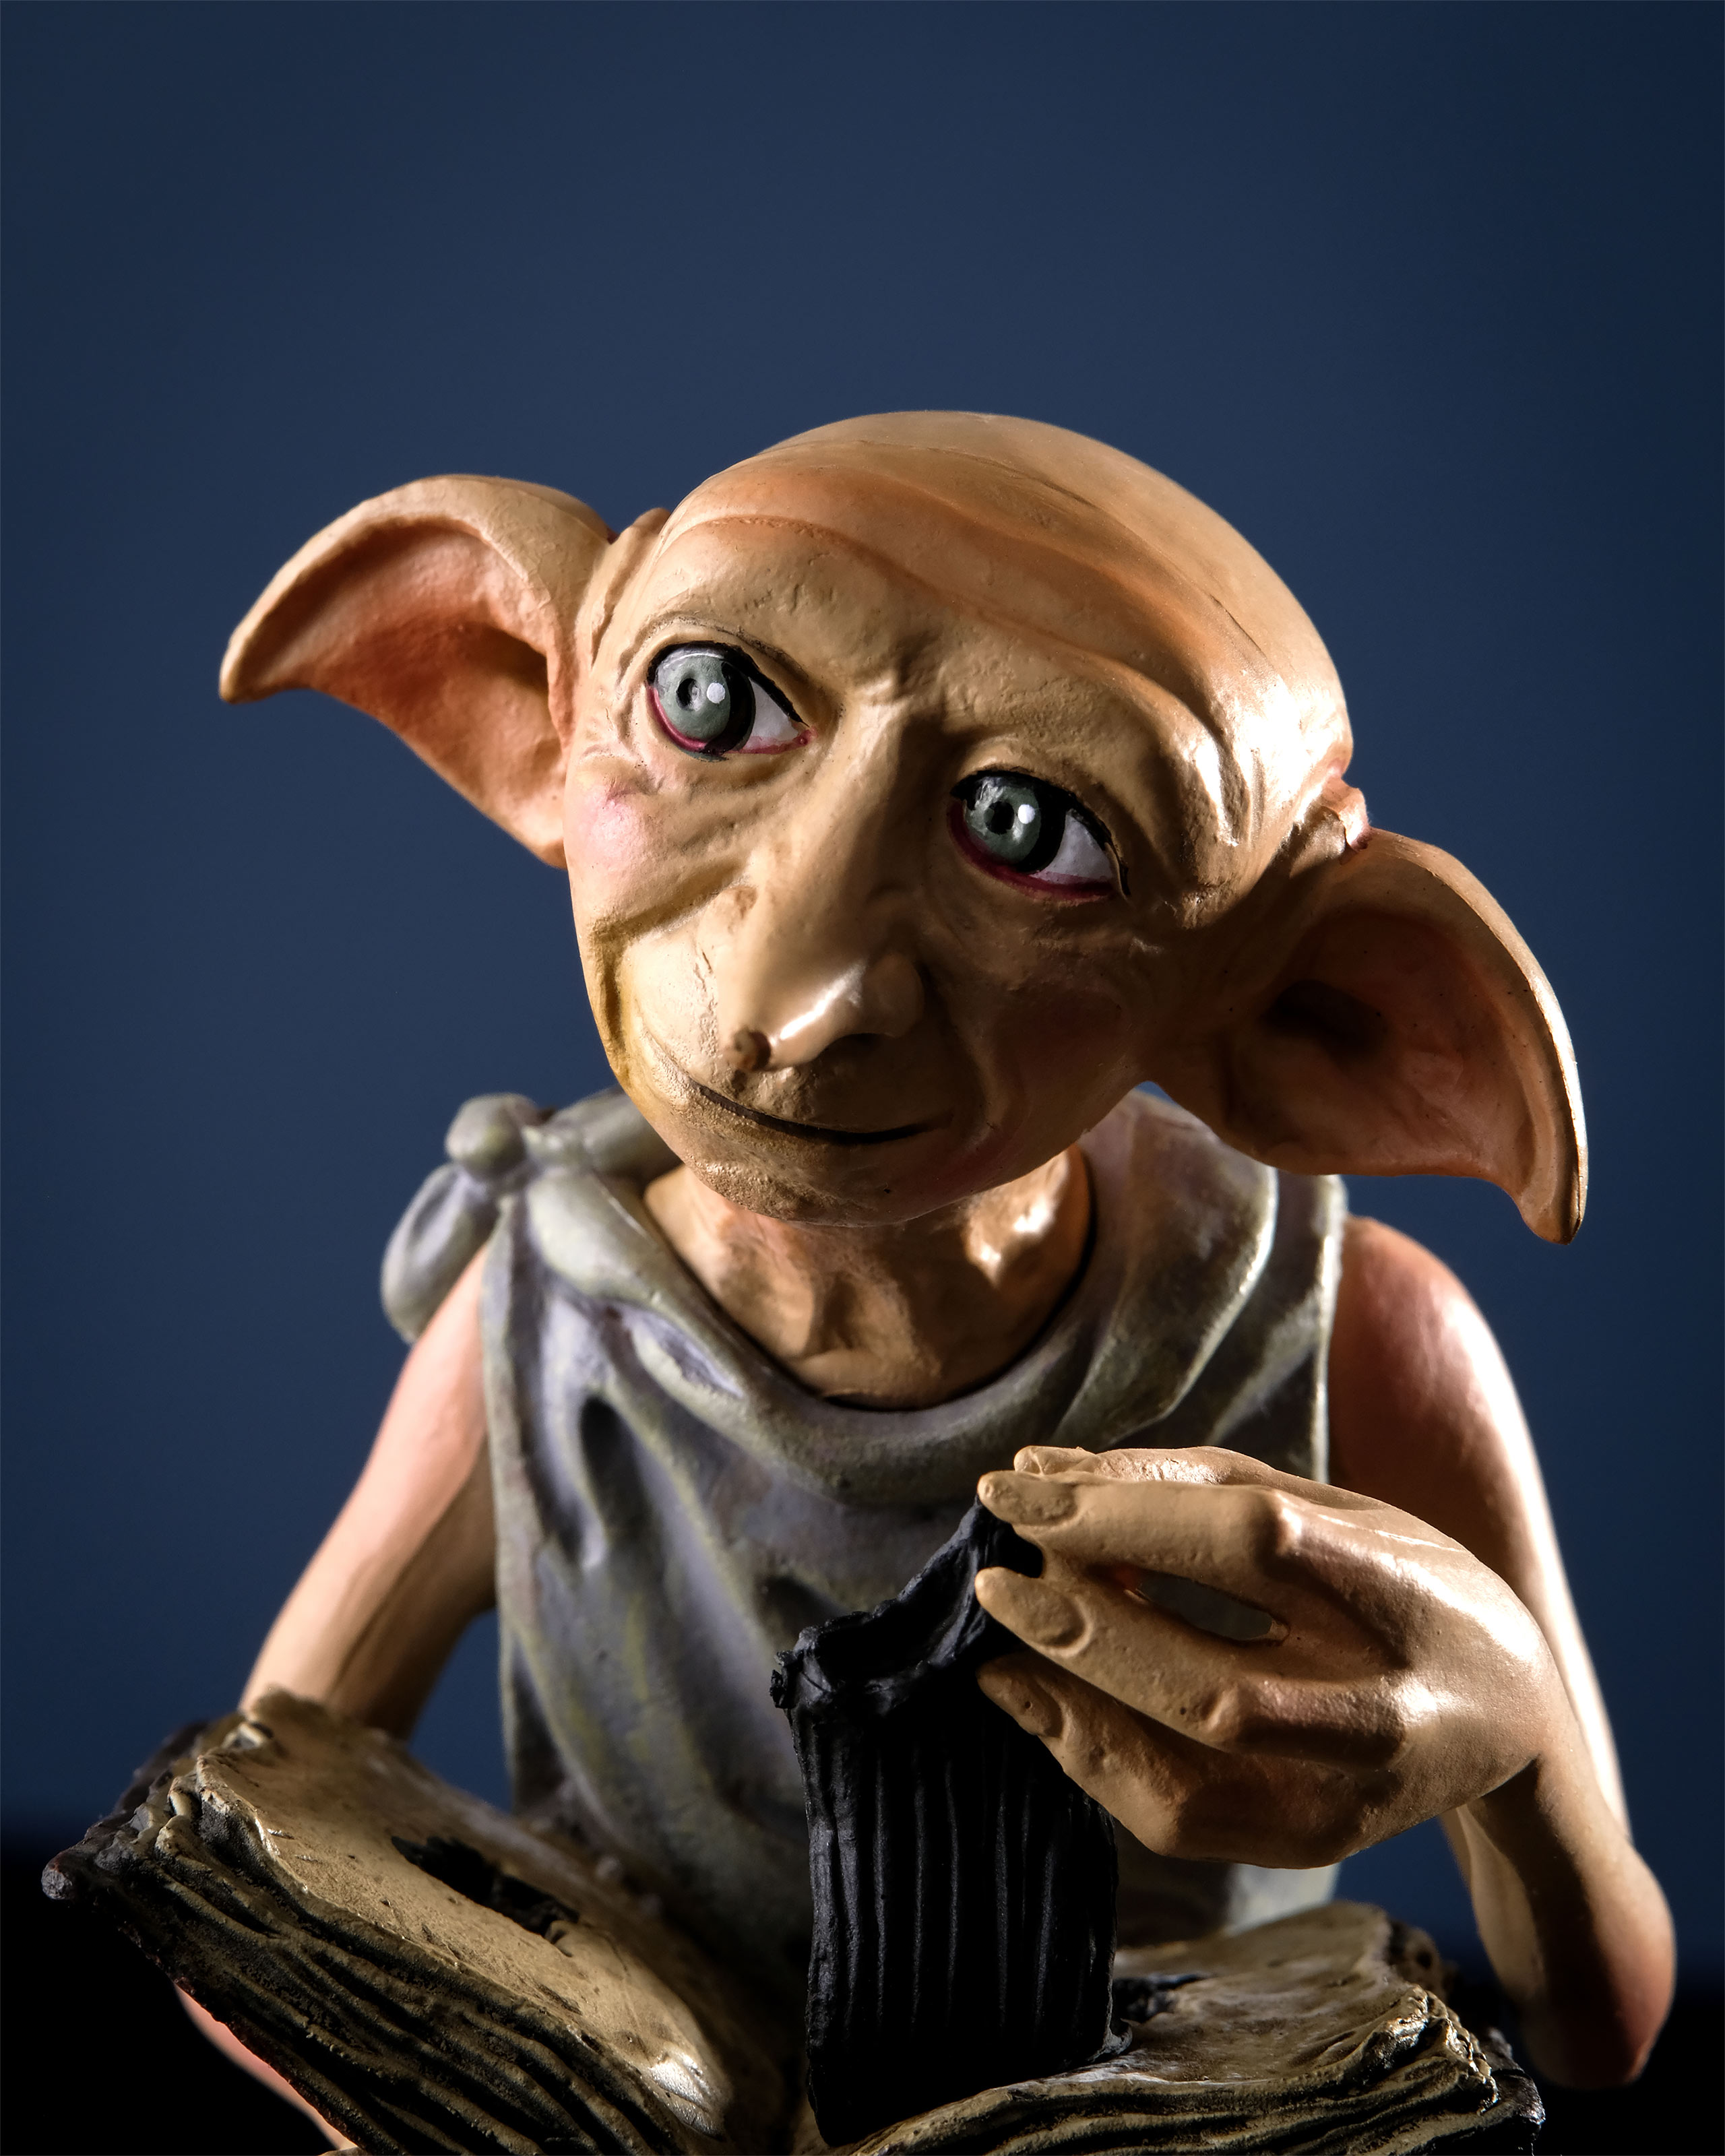  BendyFigs Harry Potter Dobby : Toys & Games